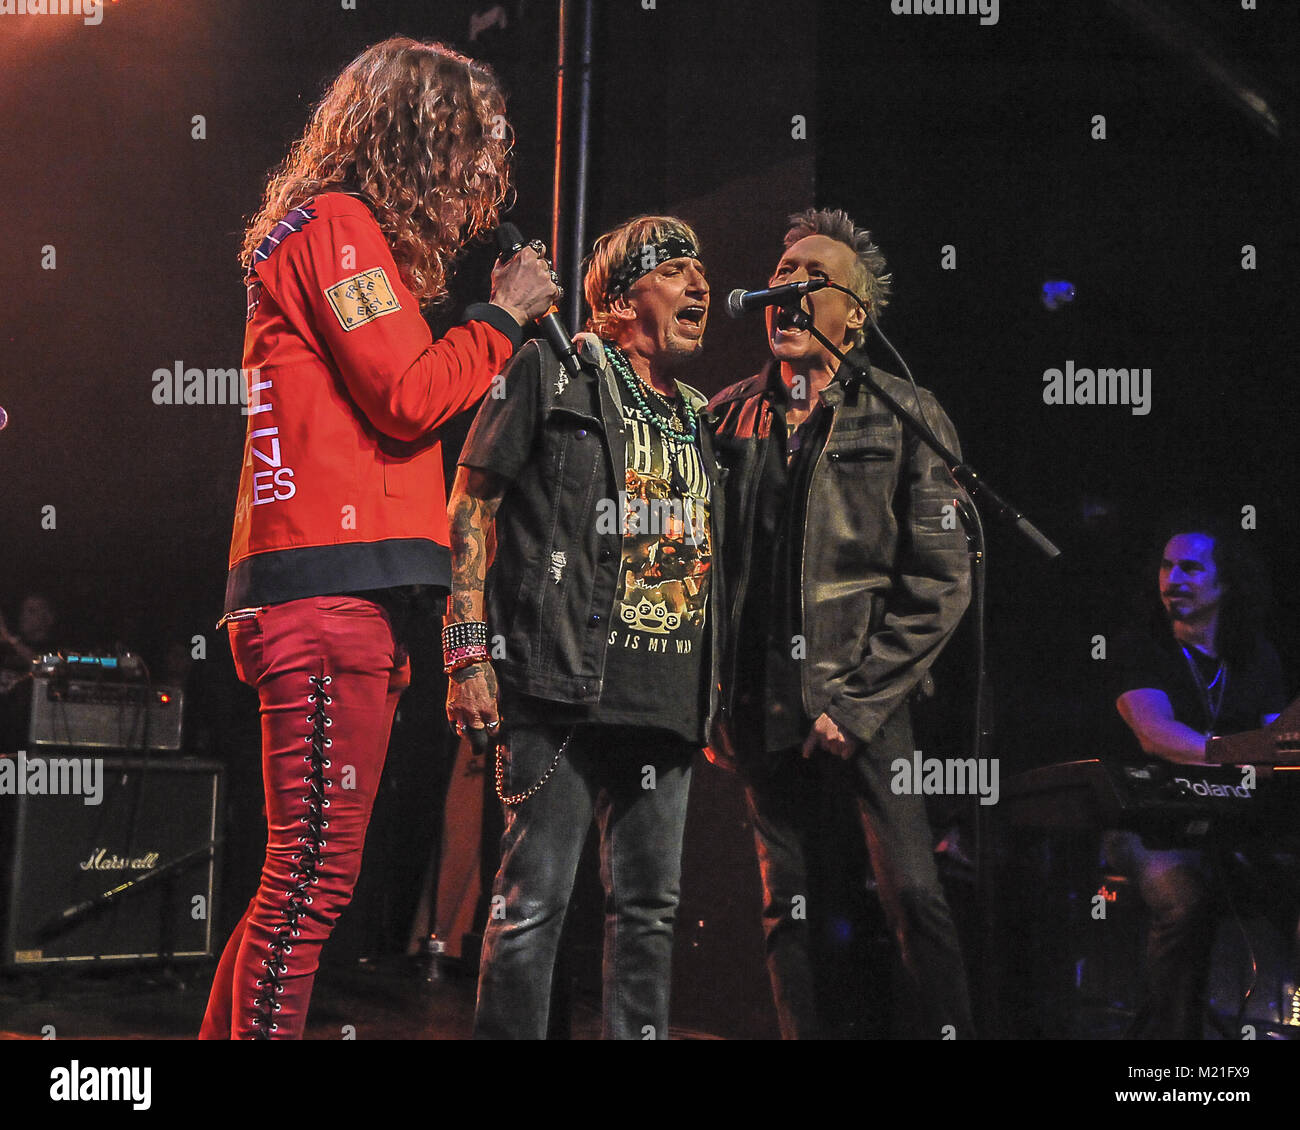 Santa Ana, CA, USA. 27th Jan, 2018. Keith St. James, Jack Russel and James Kottak providing vocals at RMR - Ronnie Montrose Remembered 2018 NAMM JAMM with over 25 Artists play some of Ronnie's greatest hits at the Observatory in Santa Ana Ca. for the 2018 Annual NAMM Show, the global business convention for the music industry. Credit: Dave Safley/ZUMA Wire/Alamy Live News Stock Photo